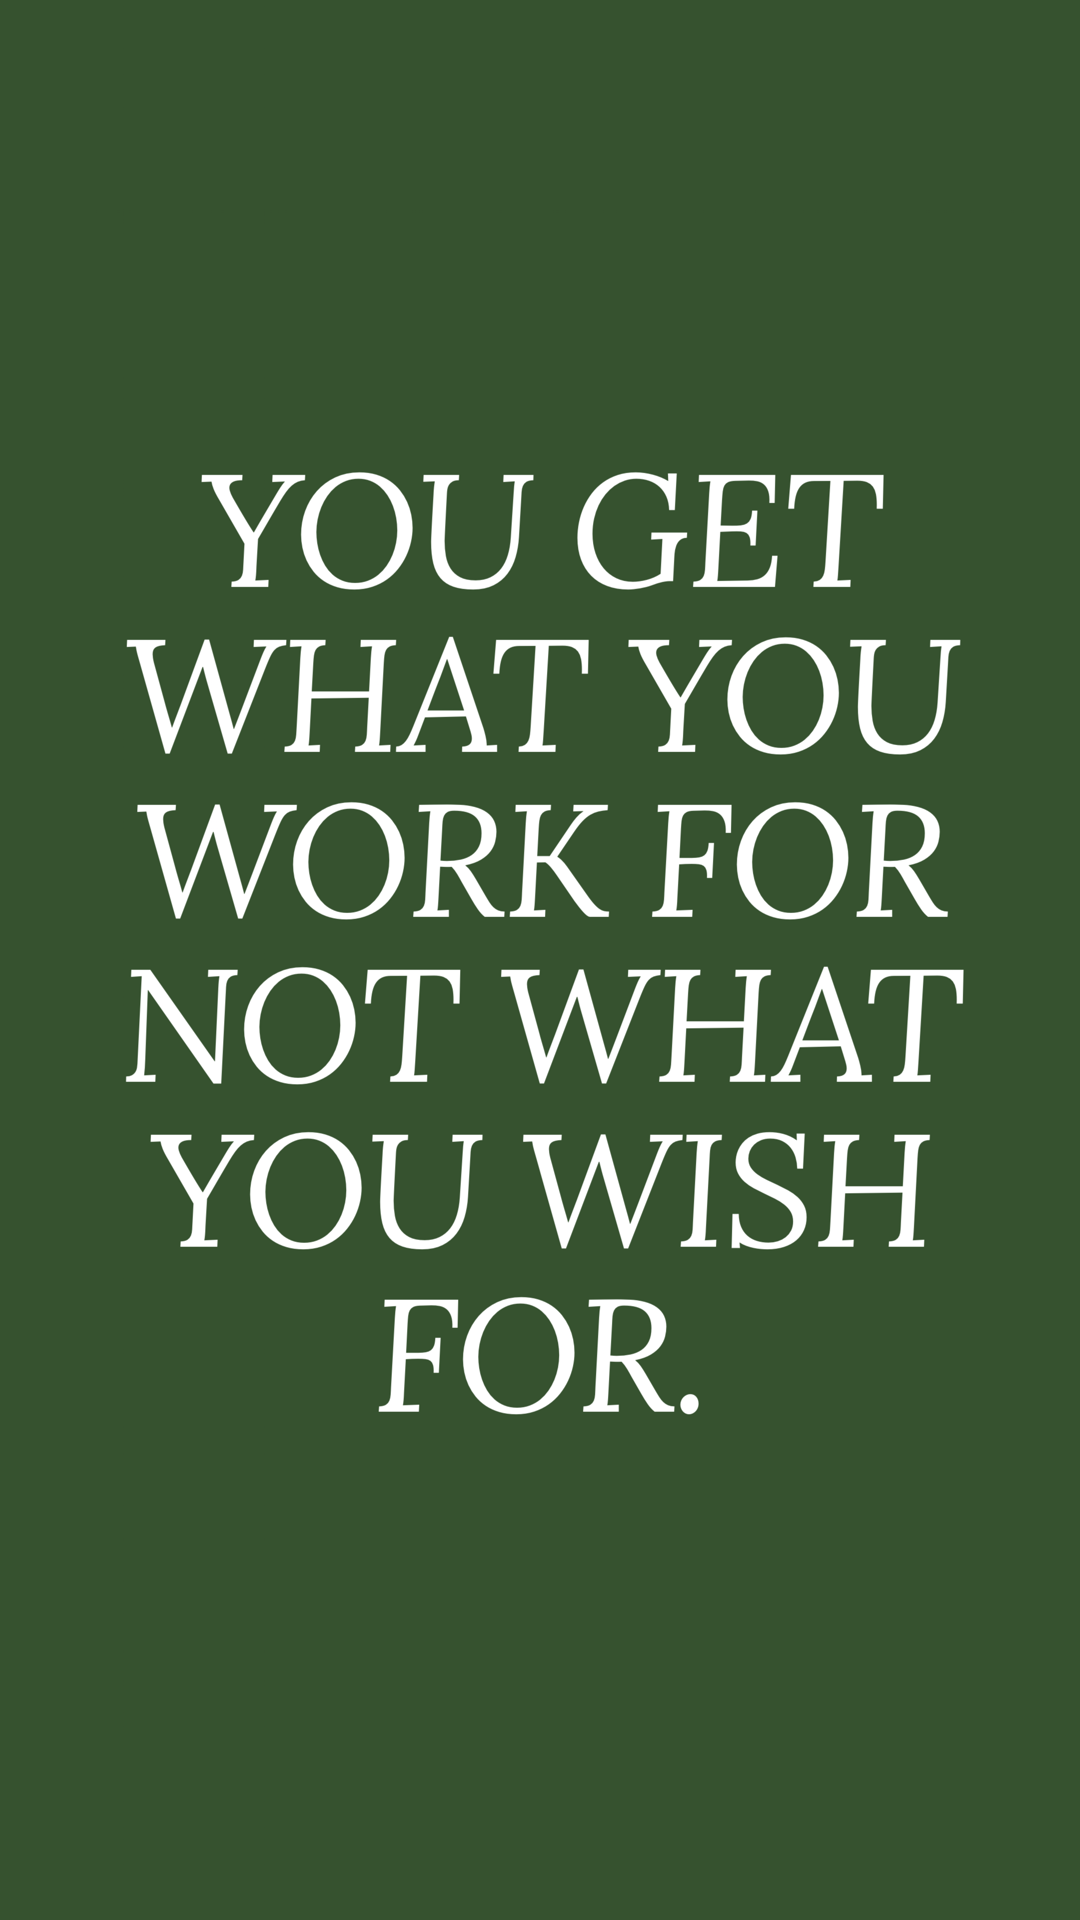 you get what you work for not what you wish foro